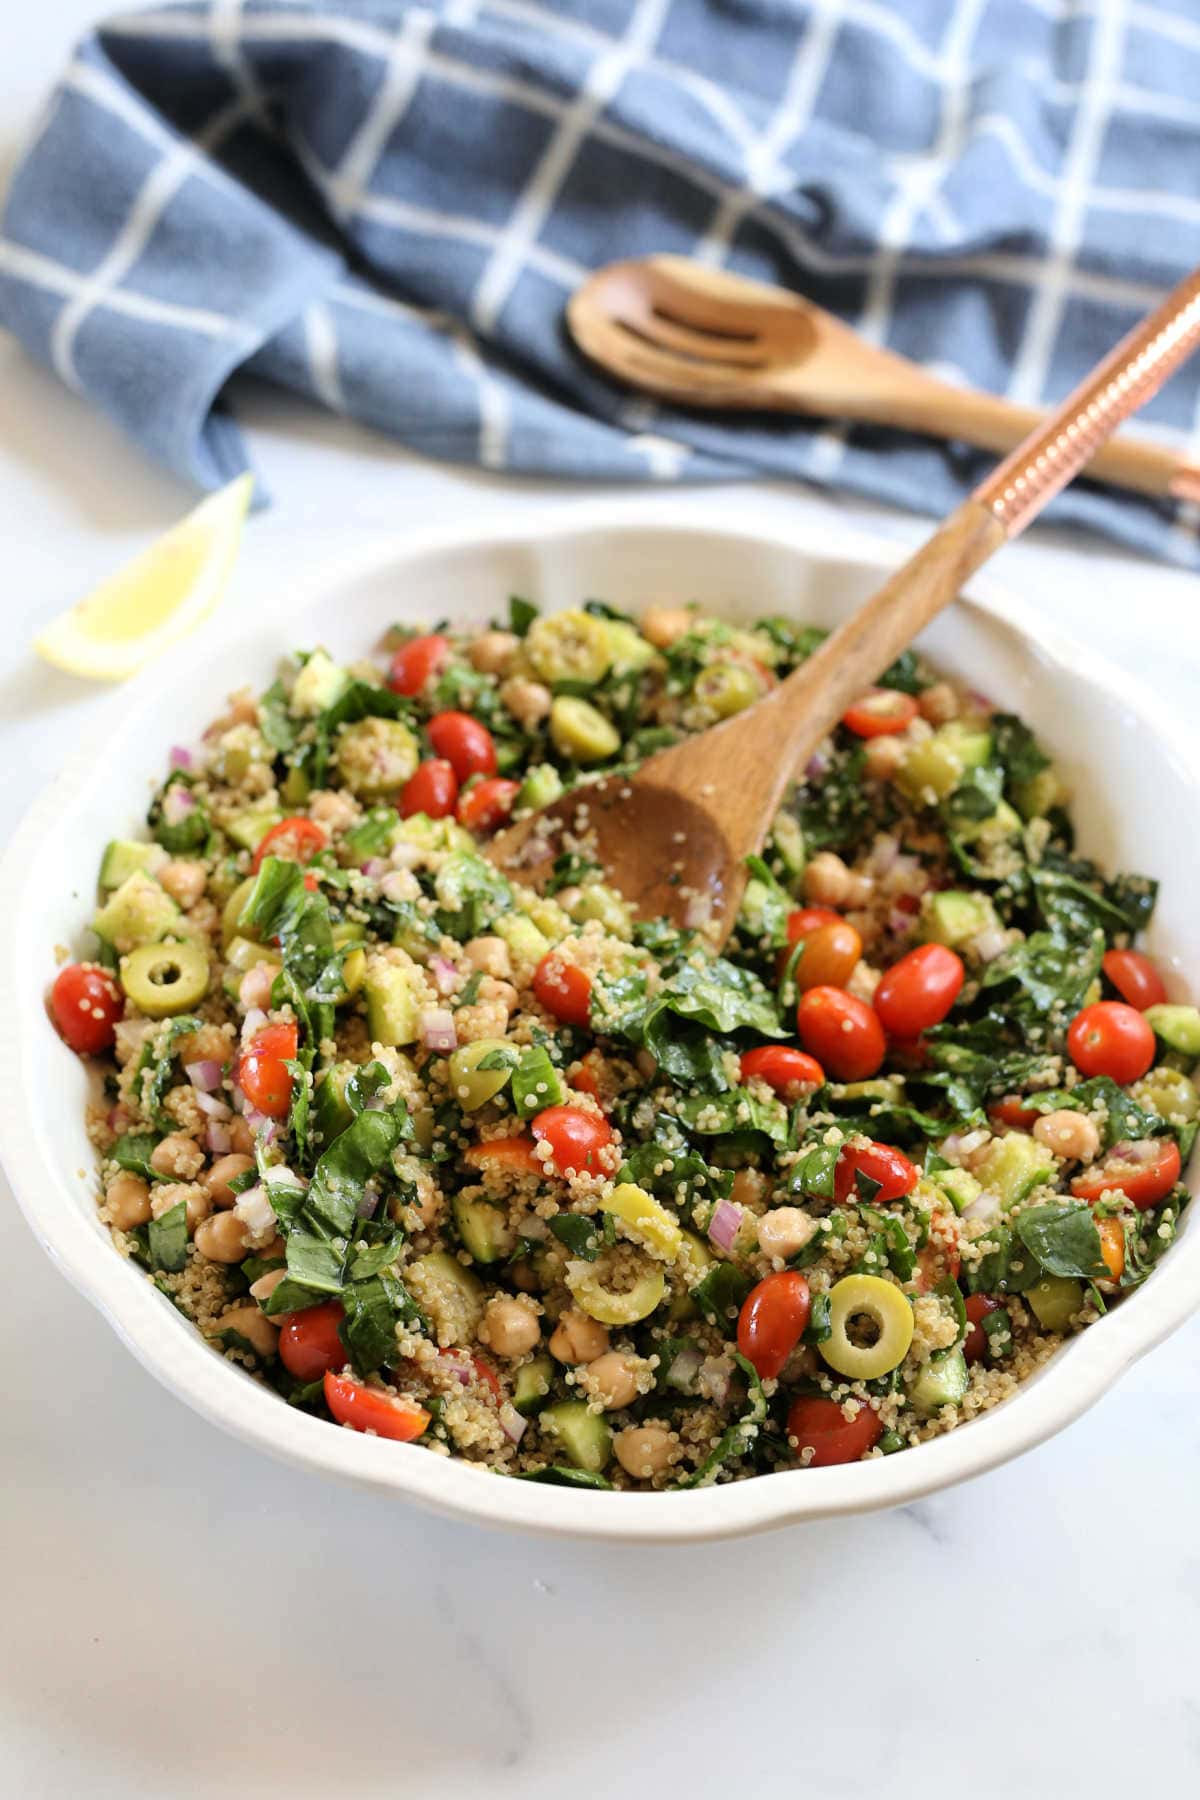 vegetable and whole grain salad in a serving platter with a wood spoon